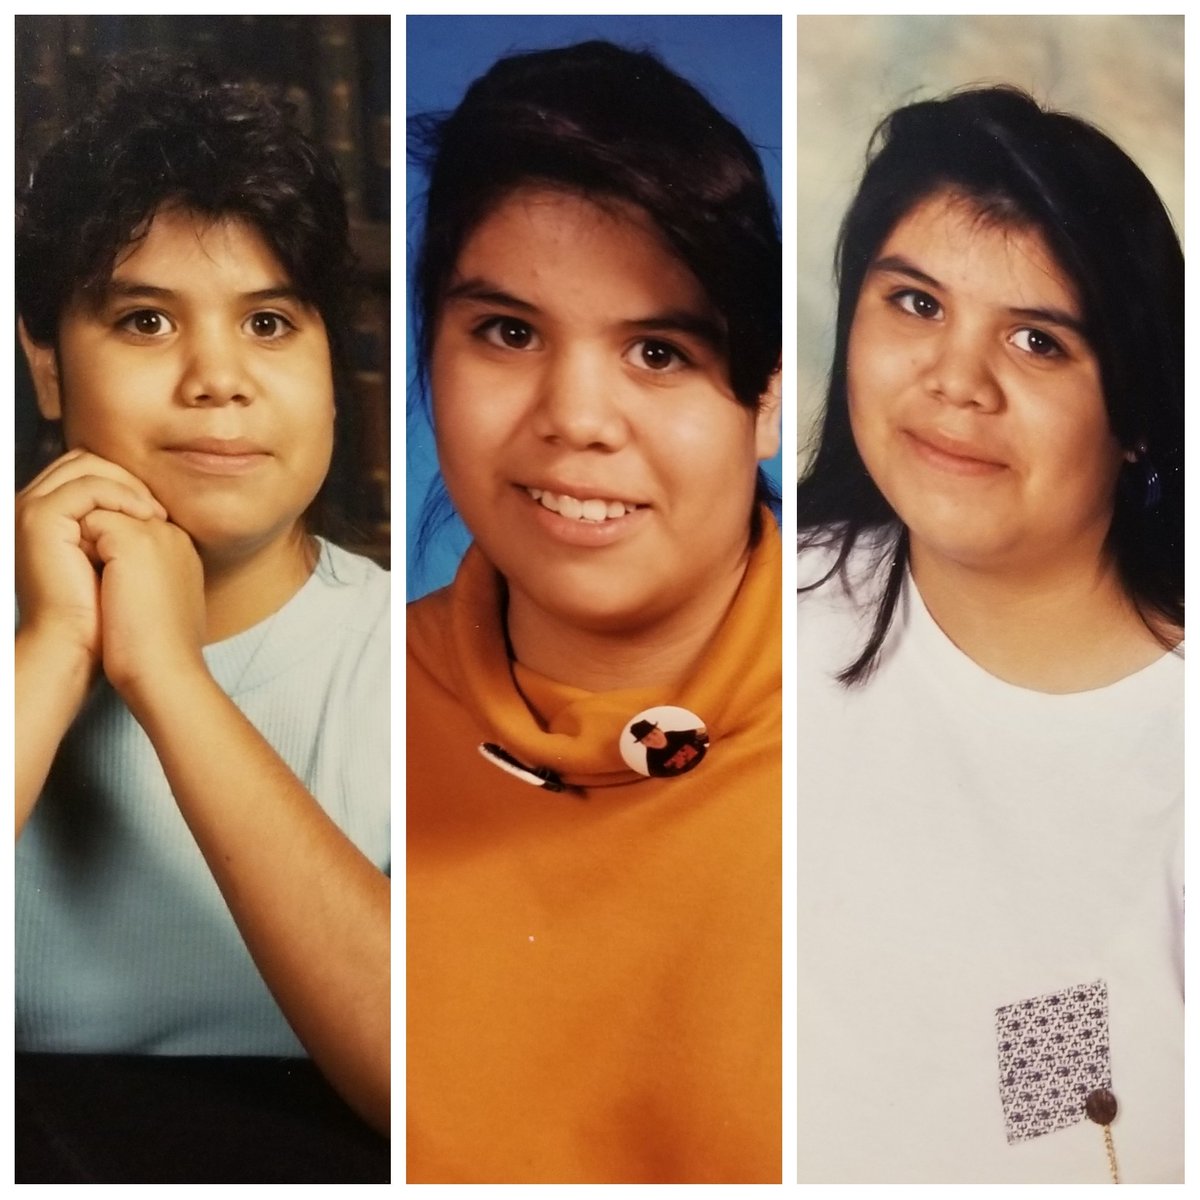 6th, 7th, 8th grade @alief_middle #VirtualSpiritWeek #middleschoolyears #granthampanthers